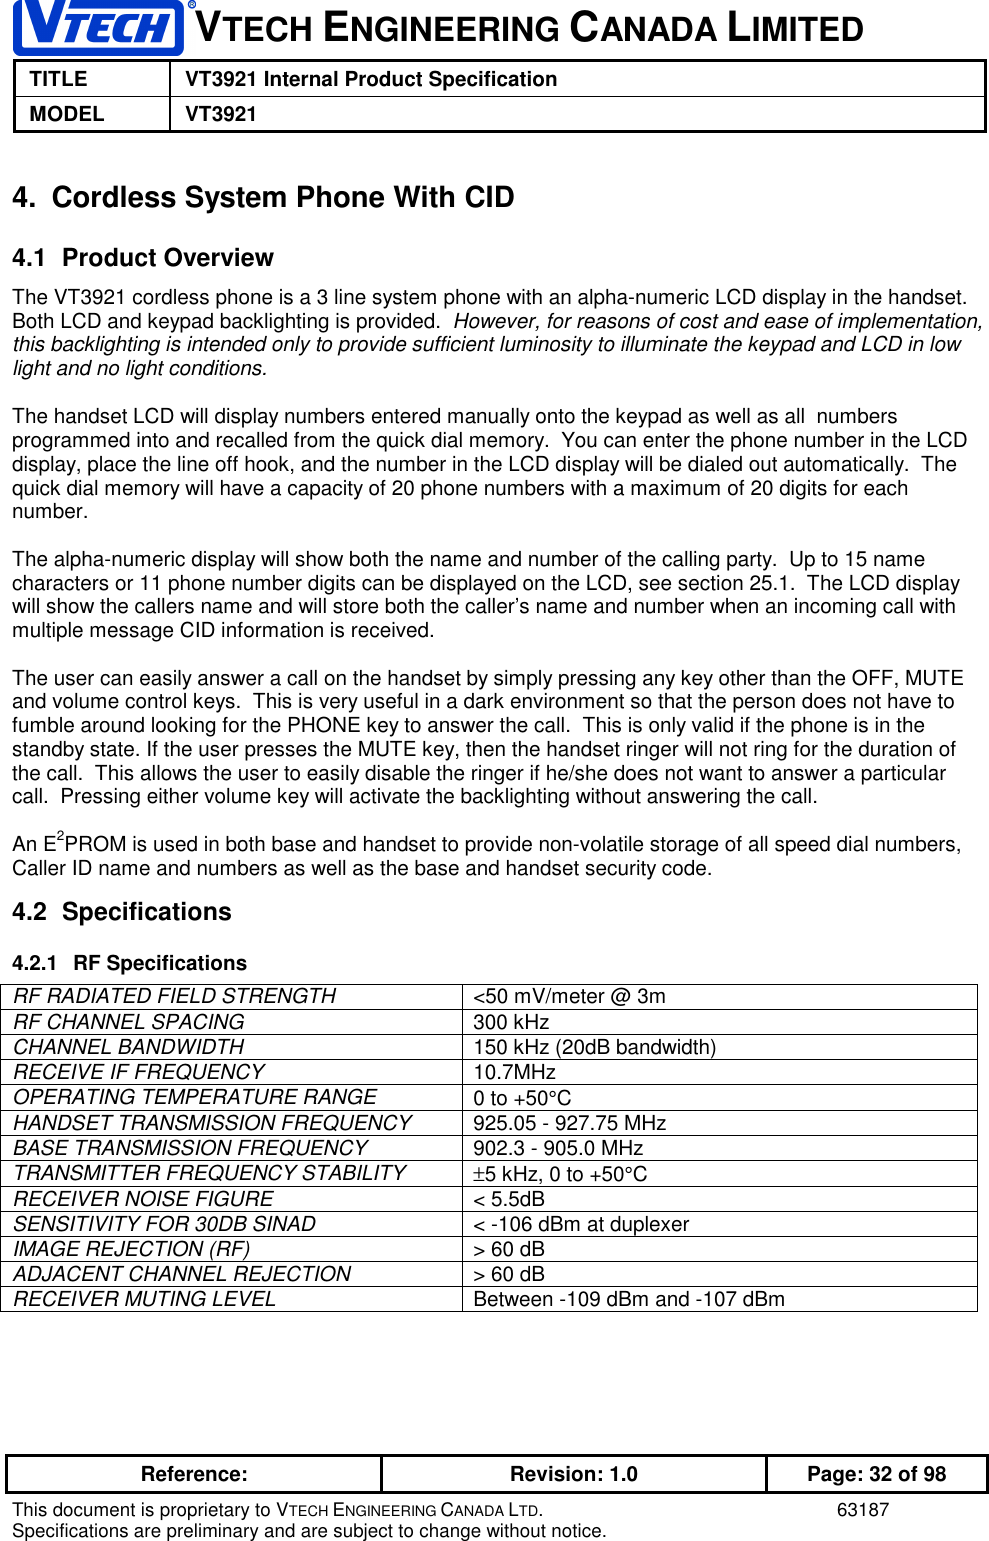 VTECH ENGINEERING CANADA LIMITEDTITLE VT3921 Internal Product SpecificationMODEL VT3921Reference: Revision: 1.0 Page: 32 of 98This document is proprietary to VTECH ENGINEERING CANADA LTD. 63187Specifications are preliminary and are subject to change without notice.4.  Cordless System Phone With CID4.1 Product OverviewThe VT3921 cordless phone is a 3 line system phone with an alpha-numeric LCD display in the handset.Both LCD and keypad backlighting is provided.  However, for reasons of cost and ease of implementation,this backlighting is intended only to provide sufficient luminosity to illuminate the keypad and LCD in lowlight and no light conditions.The handset LCD will display numbers entered manually onto the keypad as well as all  numbersprogrammed into and recalled from the quick dial memory.  You can enter the phone number in the LCDdisplay, place the line off hook, and the number in the LCD display will be dialed out automatically.  Thequick dial memory will have a capacity of 20 phone numbers with a maximum of 20 digits for eachnumber.The alpha-numeric display will show both the name and number of the calling party.  Up to 15 namecharacters or 11 phone number digits can be displayed on the LCD, see section 25.1.  The LCD displaywill show the callers name and will store both the caller’s name and number when an incoming call withmultiple message CID information is received.The user can easily answer a call on the handset by simply pressing any key other than the OFF, MUTEand volume control keys.  This is very useful in a dark environment so that the person does not have tofumble around looking for the PHONE key to answer the call.  This is only valid if the phone is in thestandby state. If the user presses the MUTE key, then the handset ringer will not ring for the duration ofthe call.  This allows the user to easily disable the ringer if he/she does not want to answer a particularcall.  Pressing either volume key will activate the backlighting without answering the call.An E2PROM is used in both base and handset to provide non-volatile storage of all speed dial numbers,Caller ID name and numbers as well as the base and handset security code.4.2 Specifications4.2.1 RF SpecificationsRF RADIATED FIELD STRENGTH &lt;50 mV/meter @ 3mRF CHANNEL SPACING 300 kHzCHANNEL BANDWIDTH 150 kHz (20dB bandwidth)RECEIVE IF FREQUENCY 10.7MHzOPERATING TEMPERATURE RANGE 0 to +50°CHANDSET TRANSMISSION FREQUENCY 925.05 - 927.75 MHzBASE TRANSMISSION FREQUENCY 902.3 - 905.0 MHzTRANSMITTER FREQUENCY STABILITY ±5 kHz, 0 to +50°CRECEIVER NOISE FIGURE &lt; 5.5dBSENSITIVITY FOR 30DB SINAD &lt; -106 dBm at duplexerIMAGE REJECTION (RF) &gt; 60 dBADJACENT CHANNEL REJECTION &gt; 60 dBRECEIVER MUTING LEVEL Between -109 dBm and -107 dBm